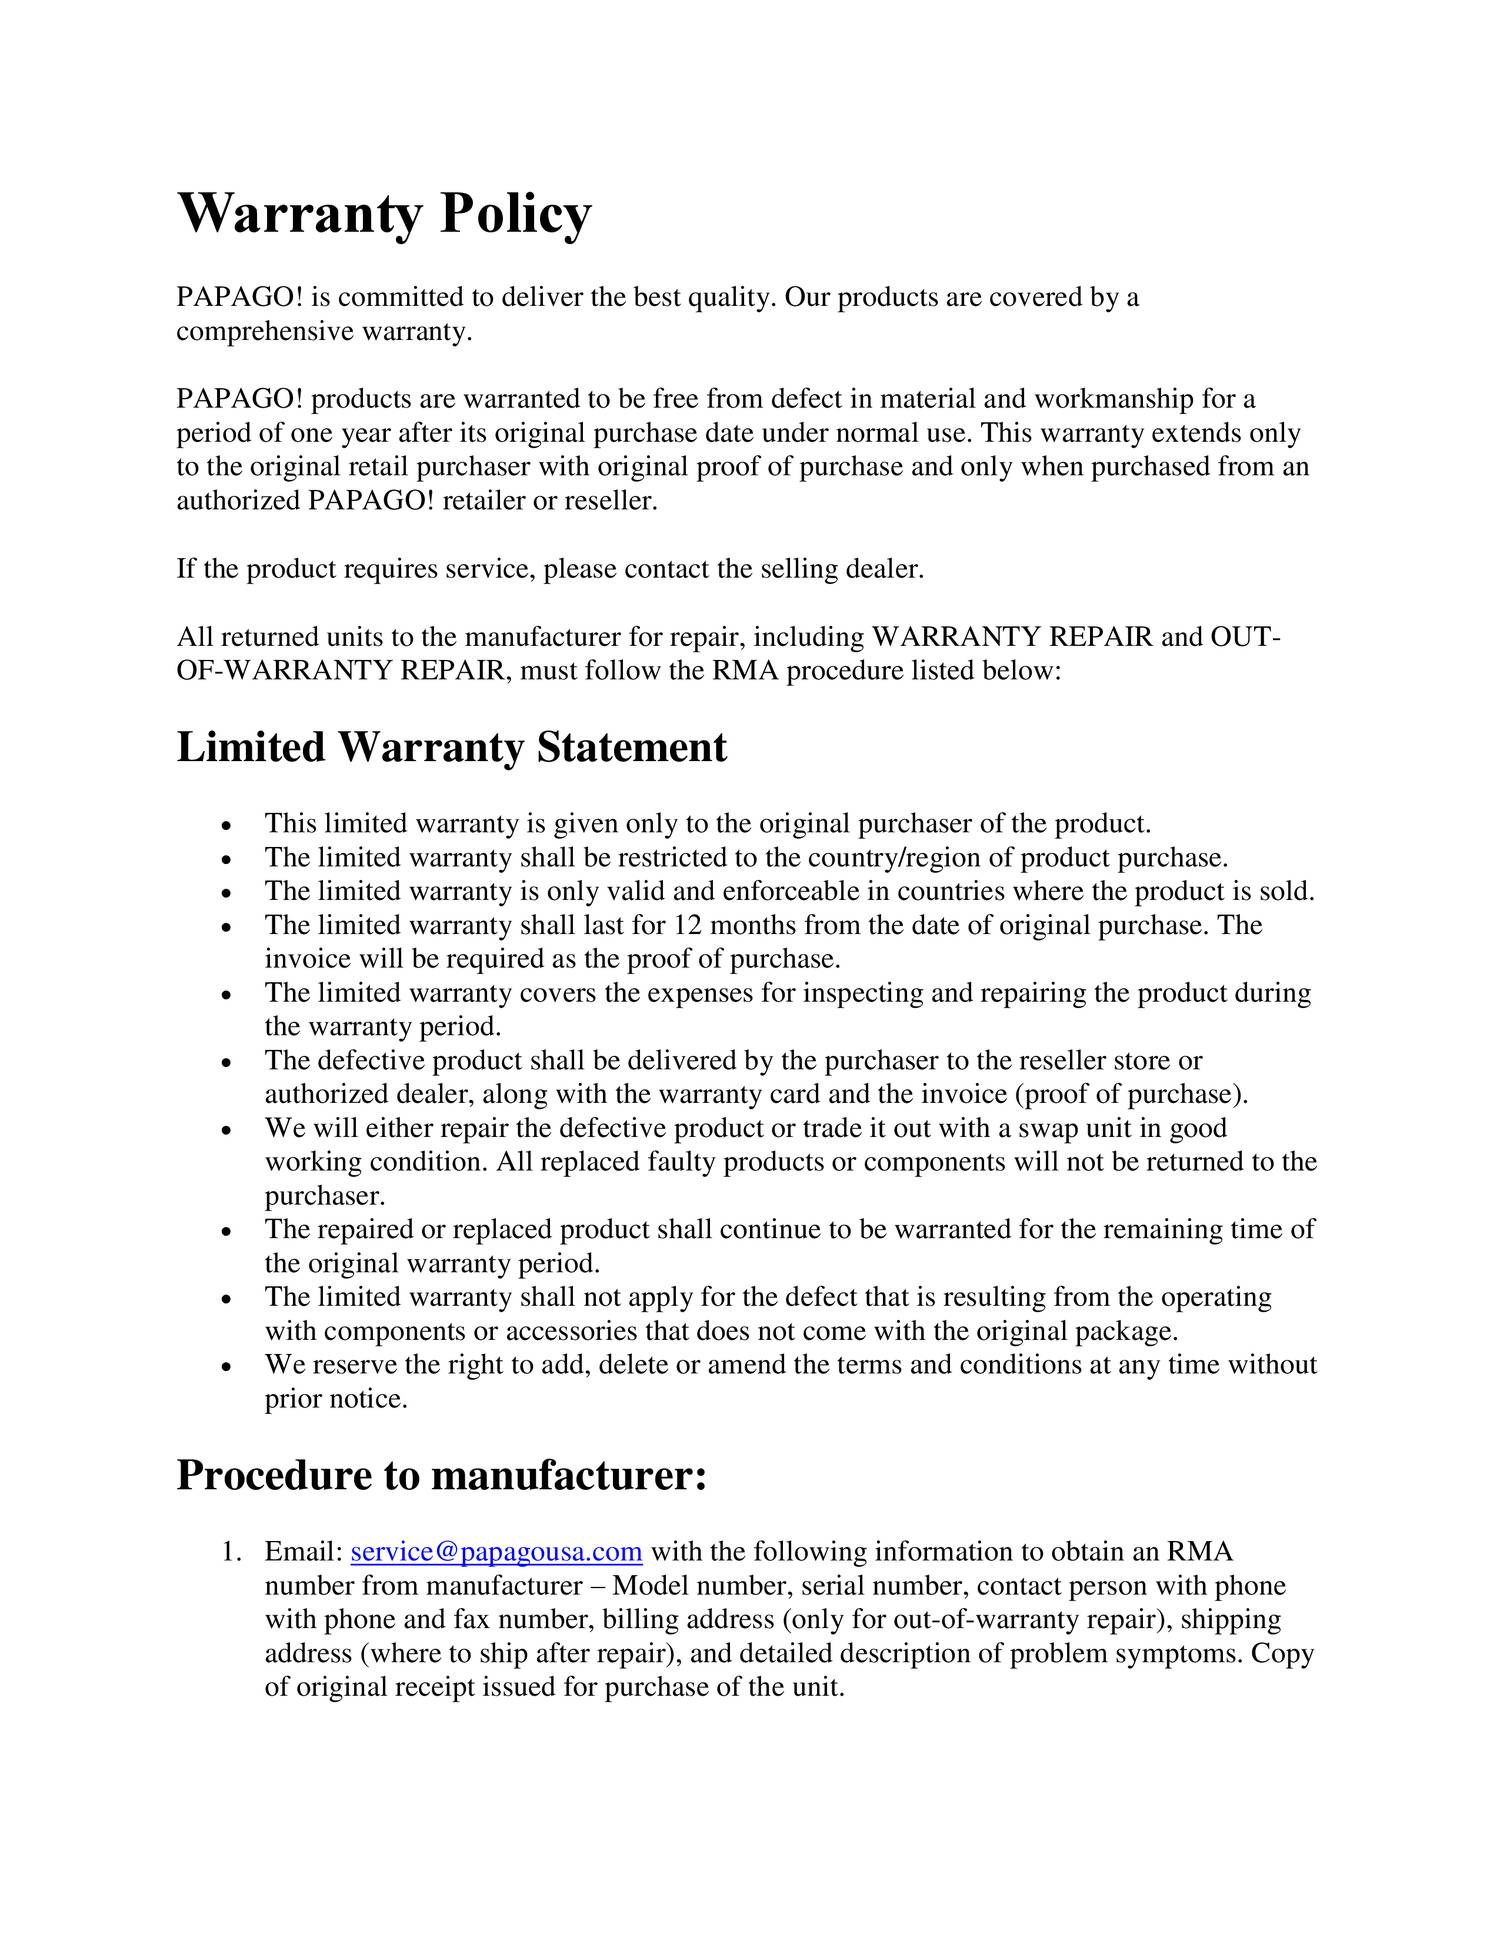 new product warranty a literature review